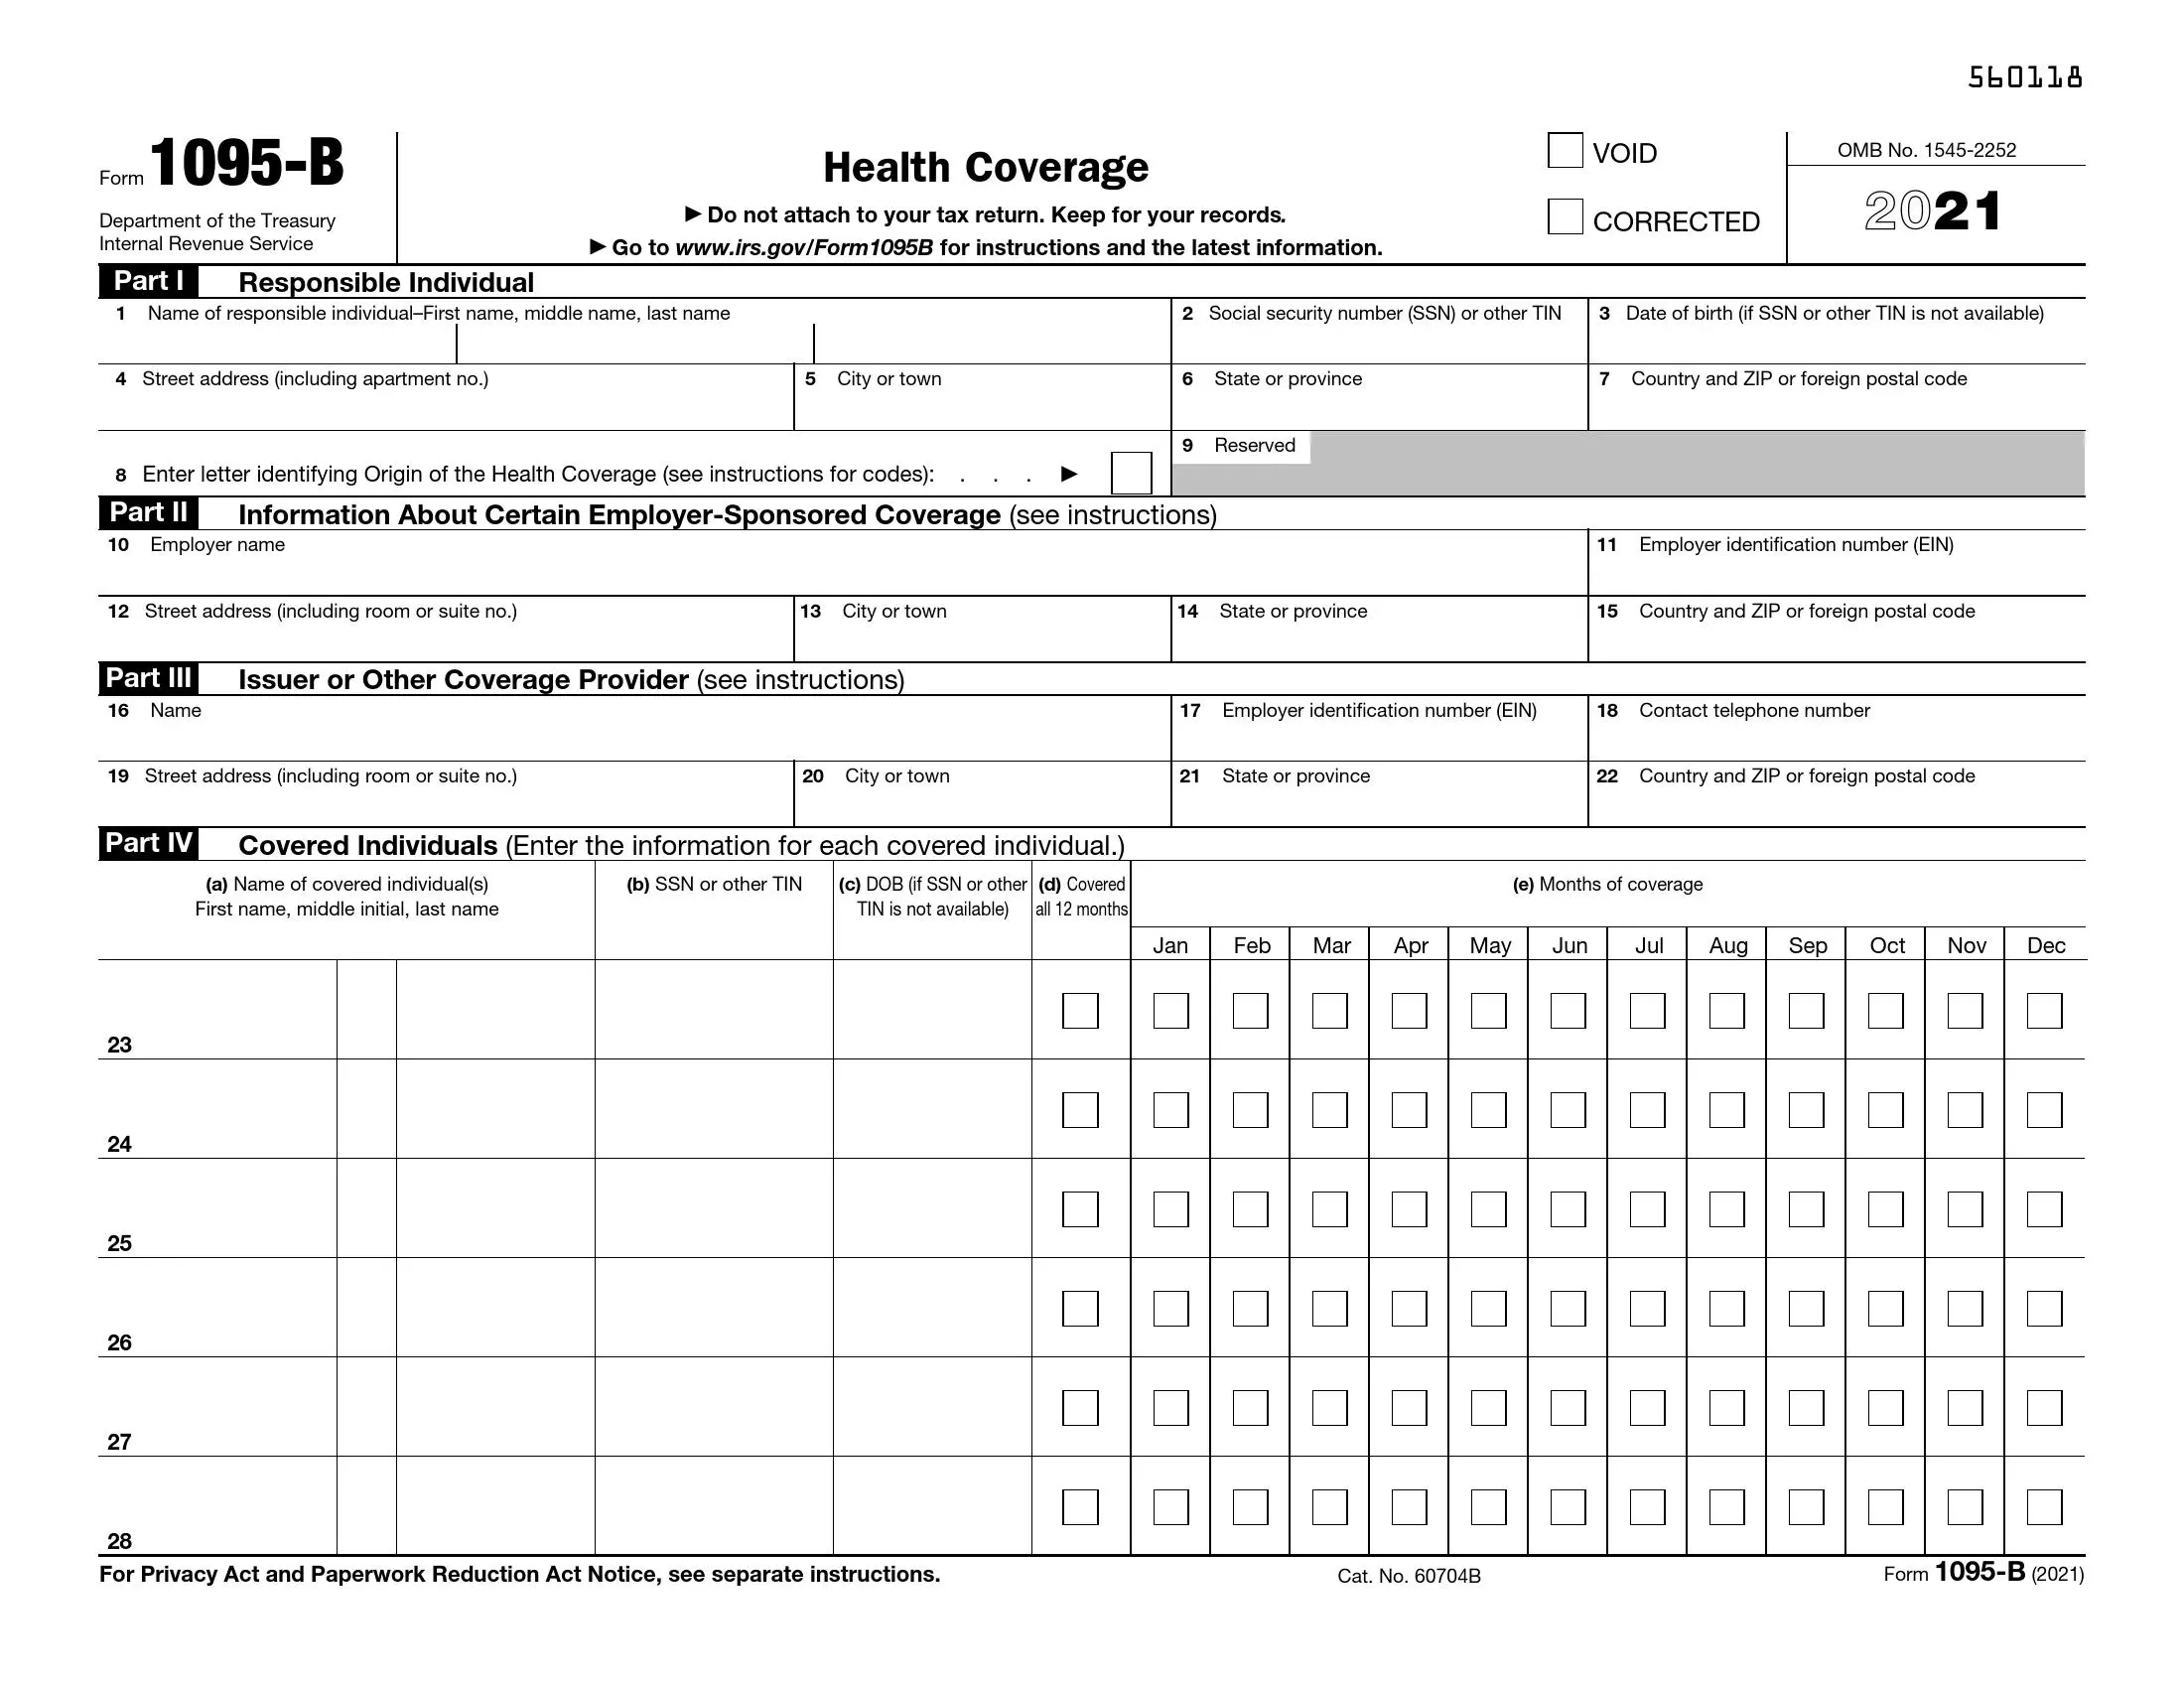 irs form 1095-b 2021 preview